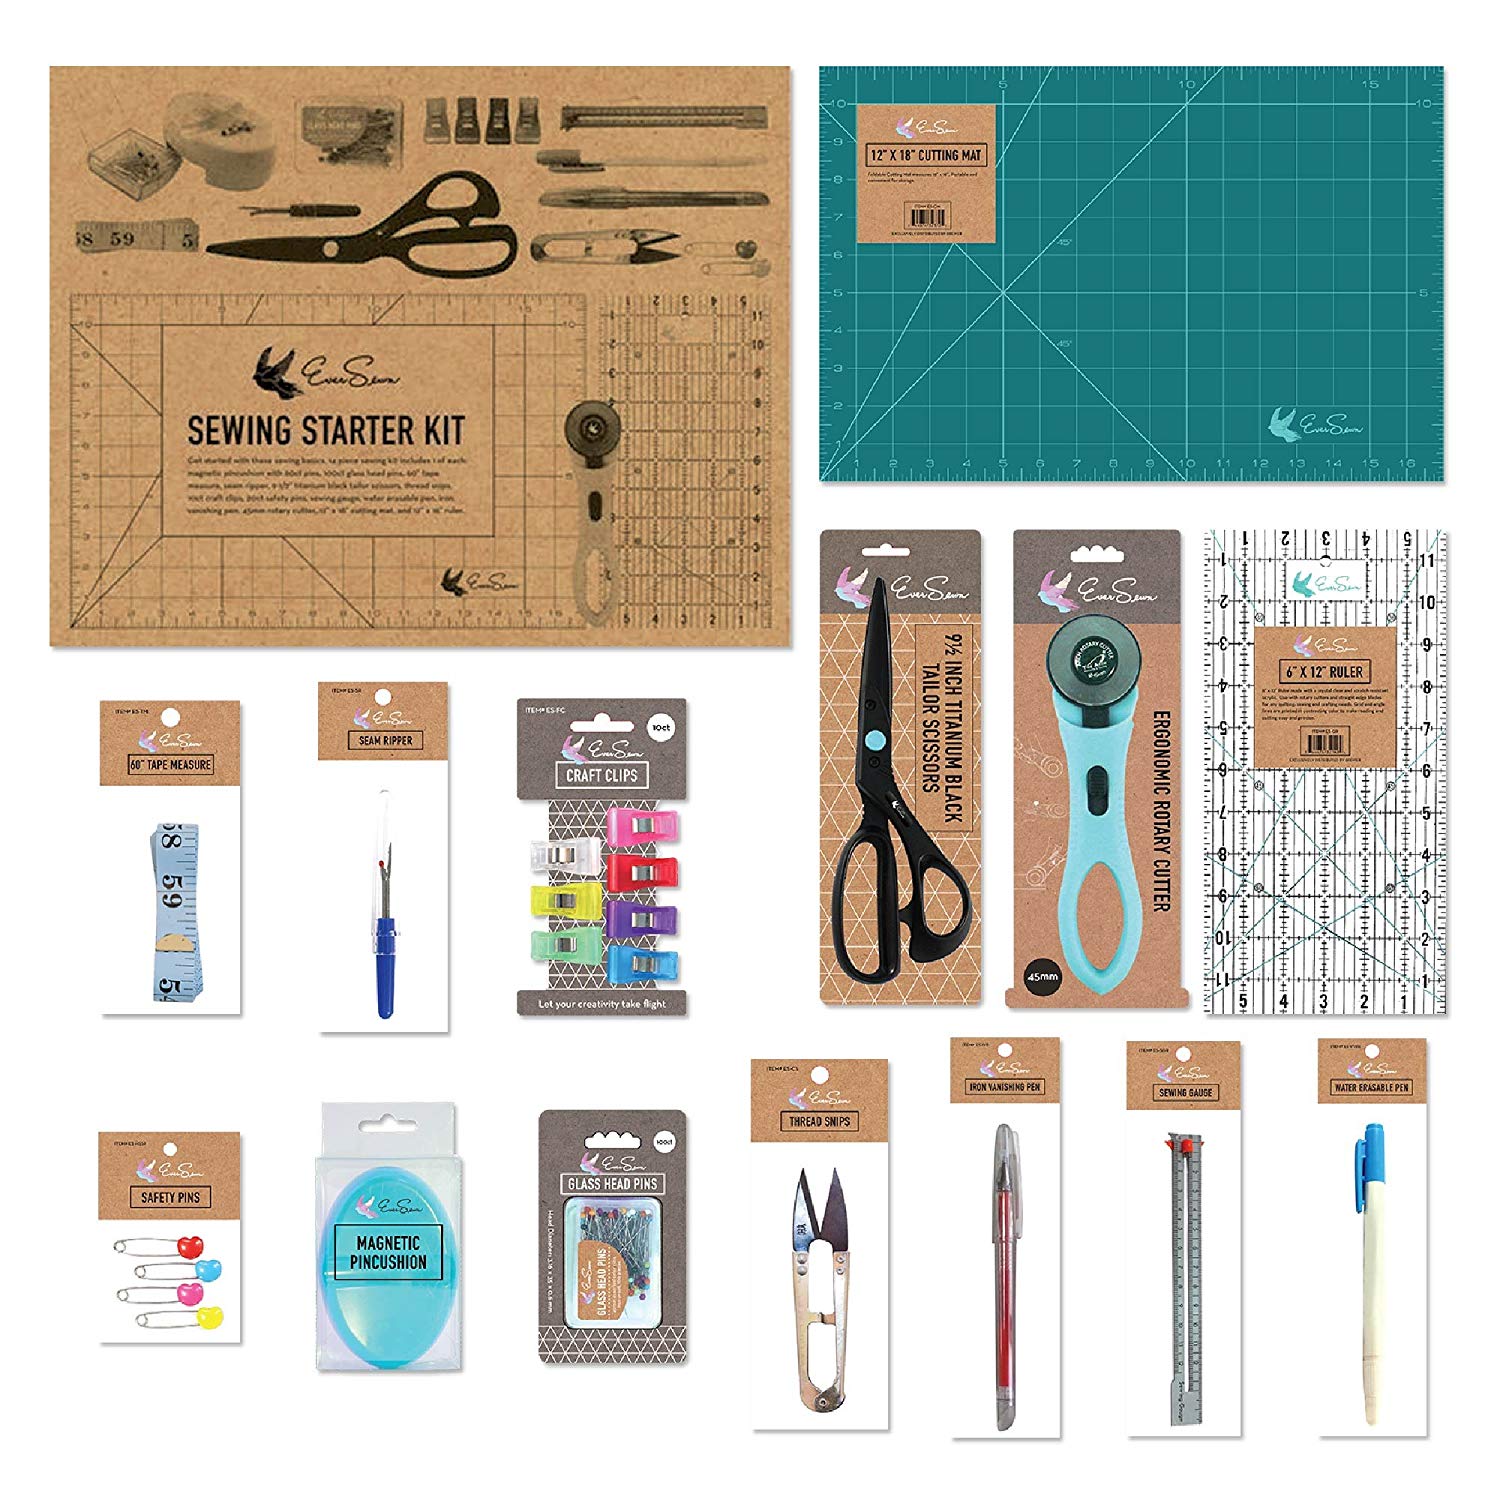 Sewing starter kit gifts for sewers